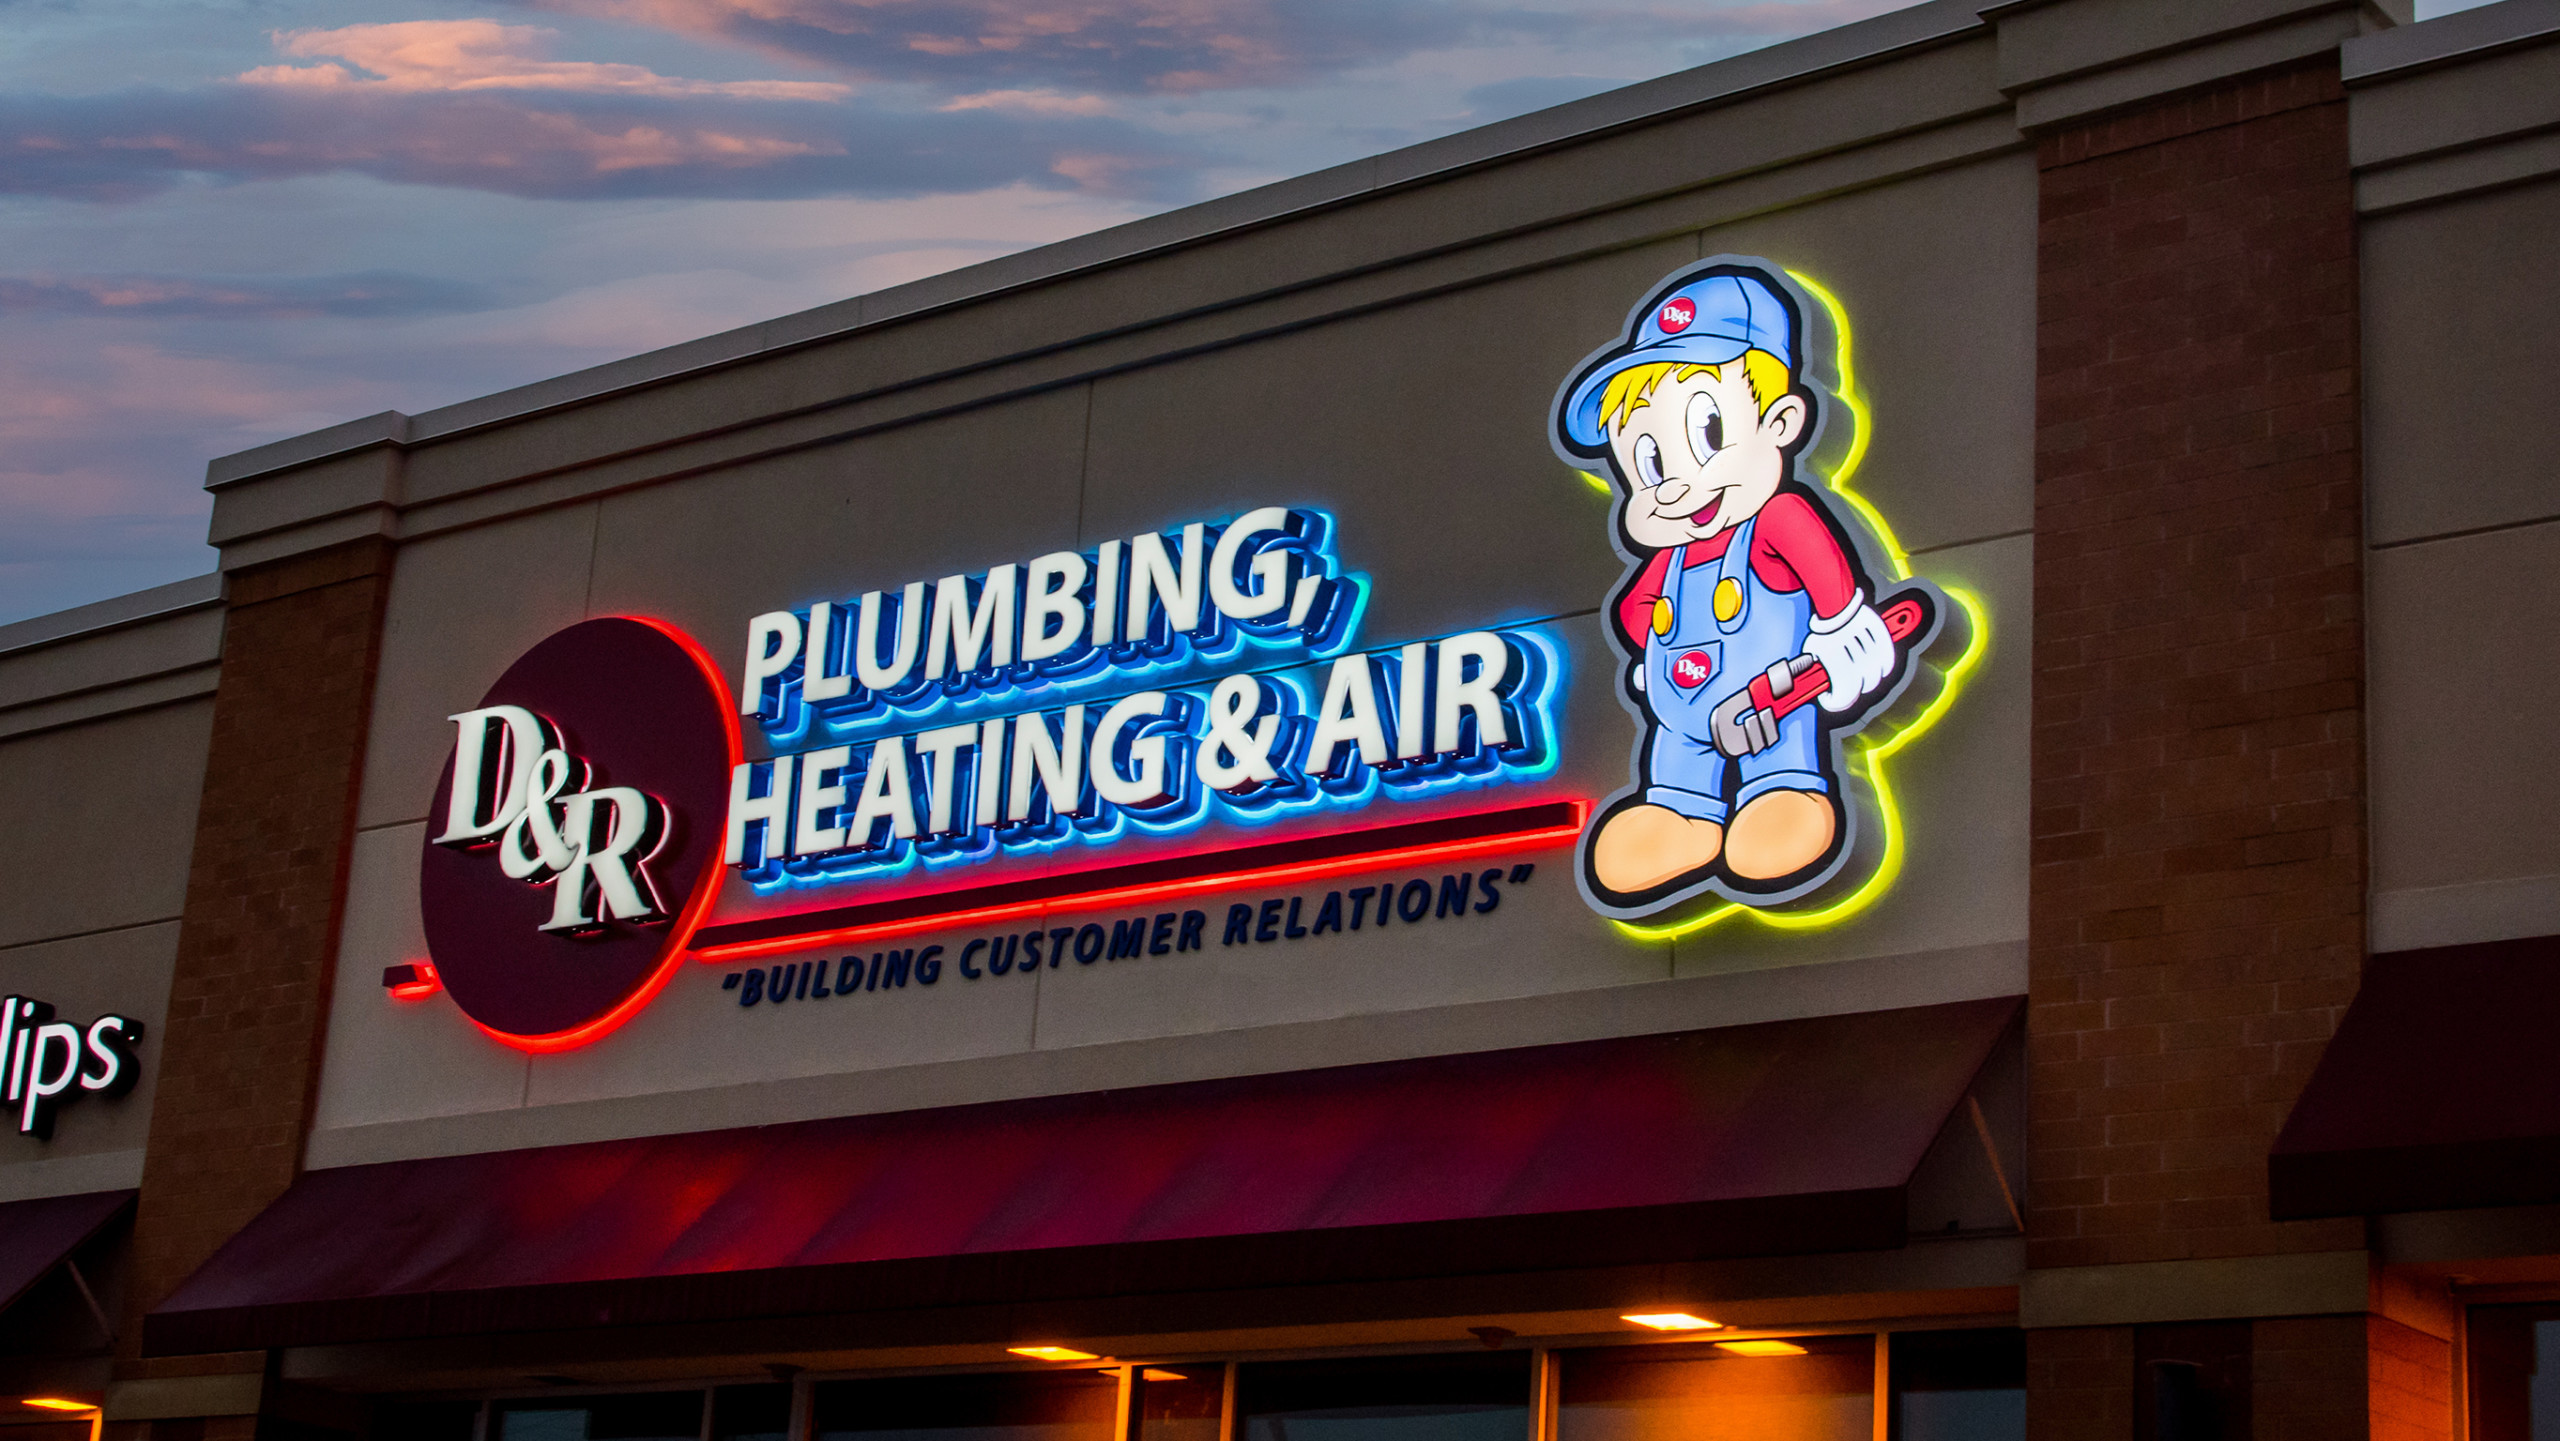 D AND R Plumbing